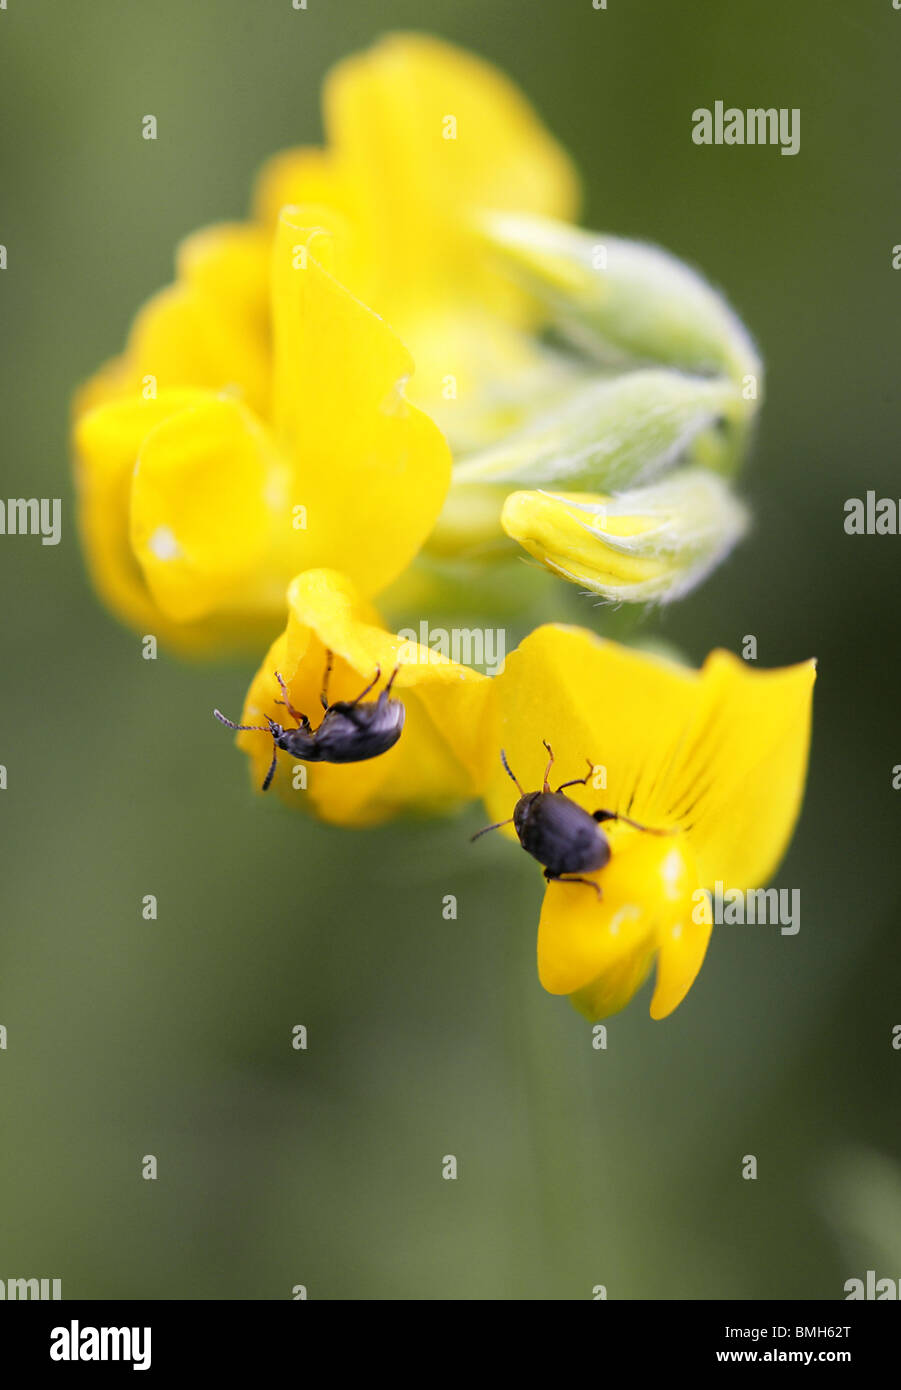 Two Tiny Pollen Beetles, Meligethes erichsoni, Nitidulidae, on a Meadow Vetchling, Lathyrus pratensis, Fabaceae. Stock Photo